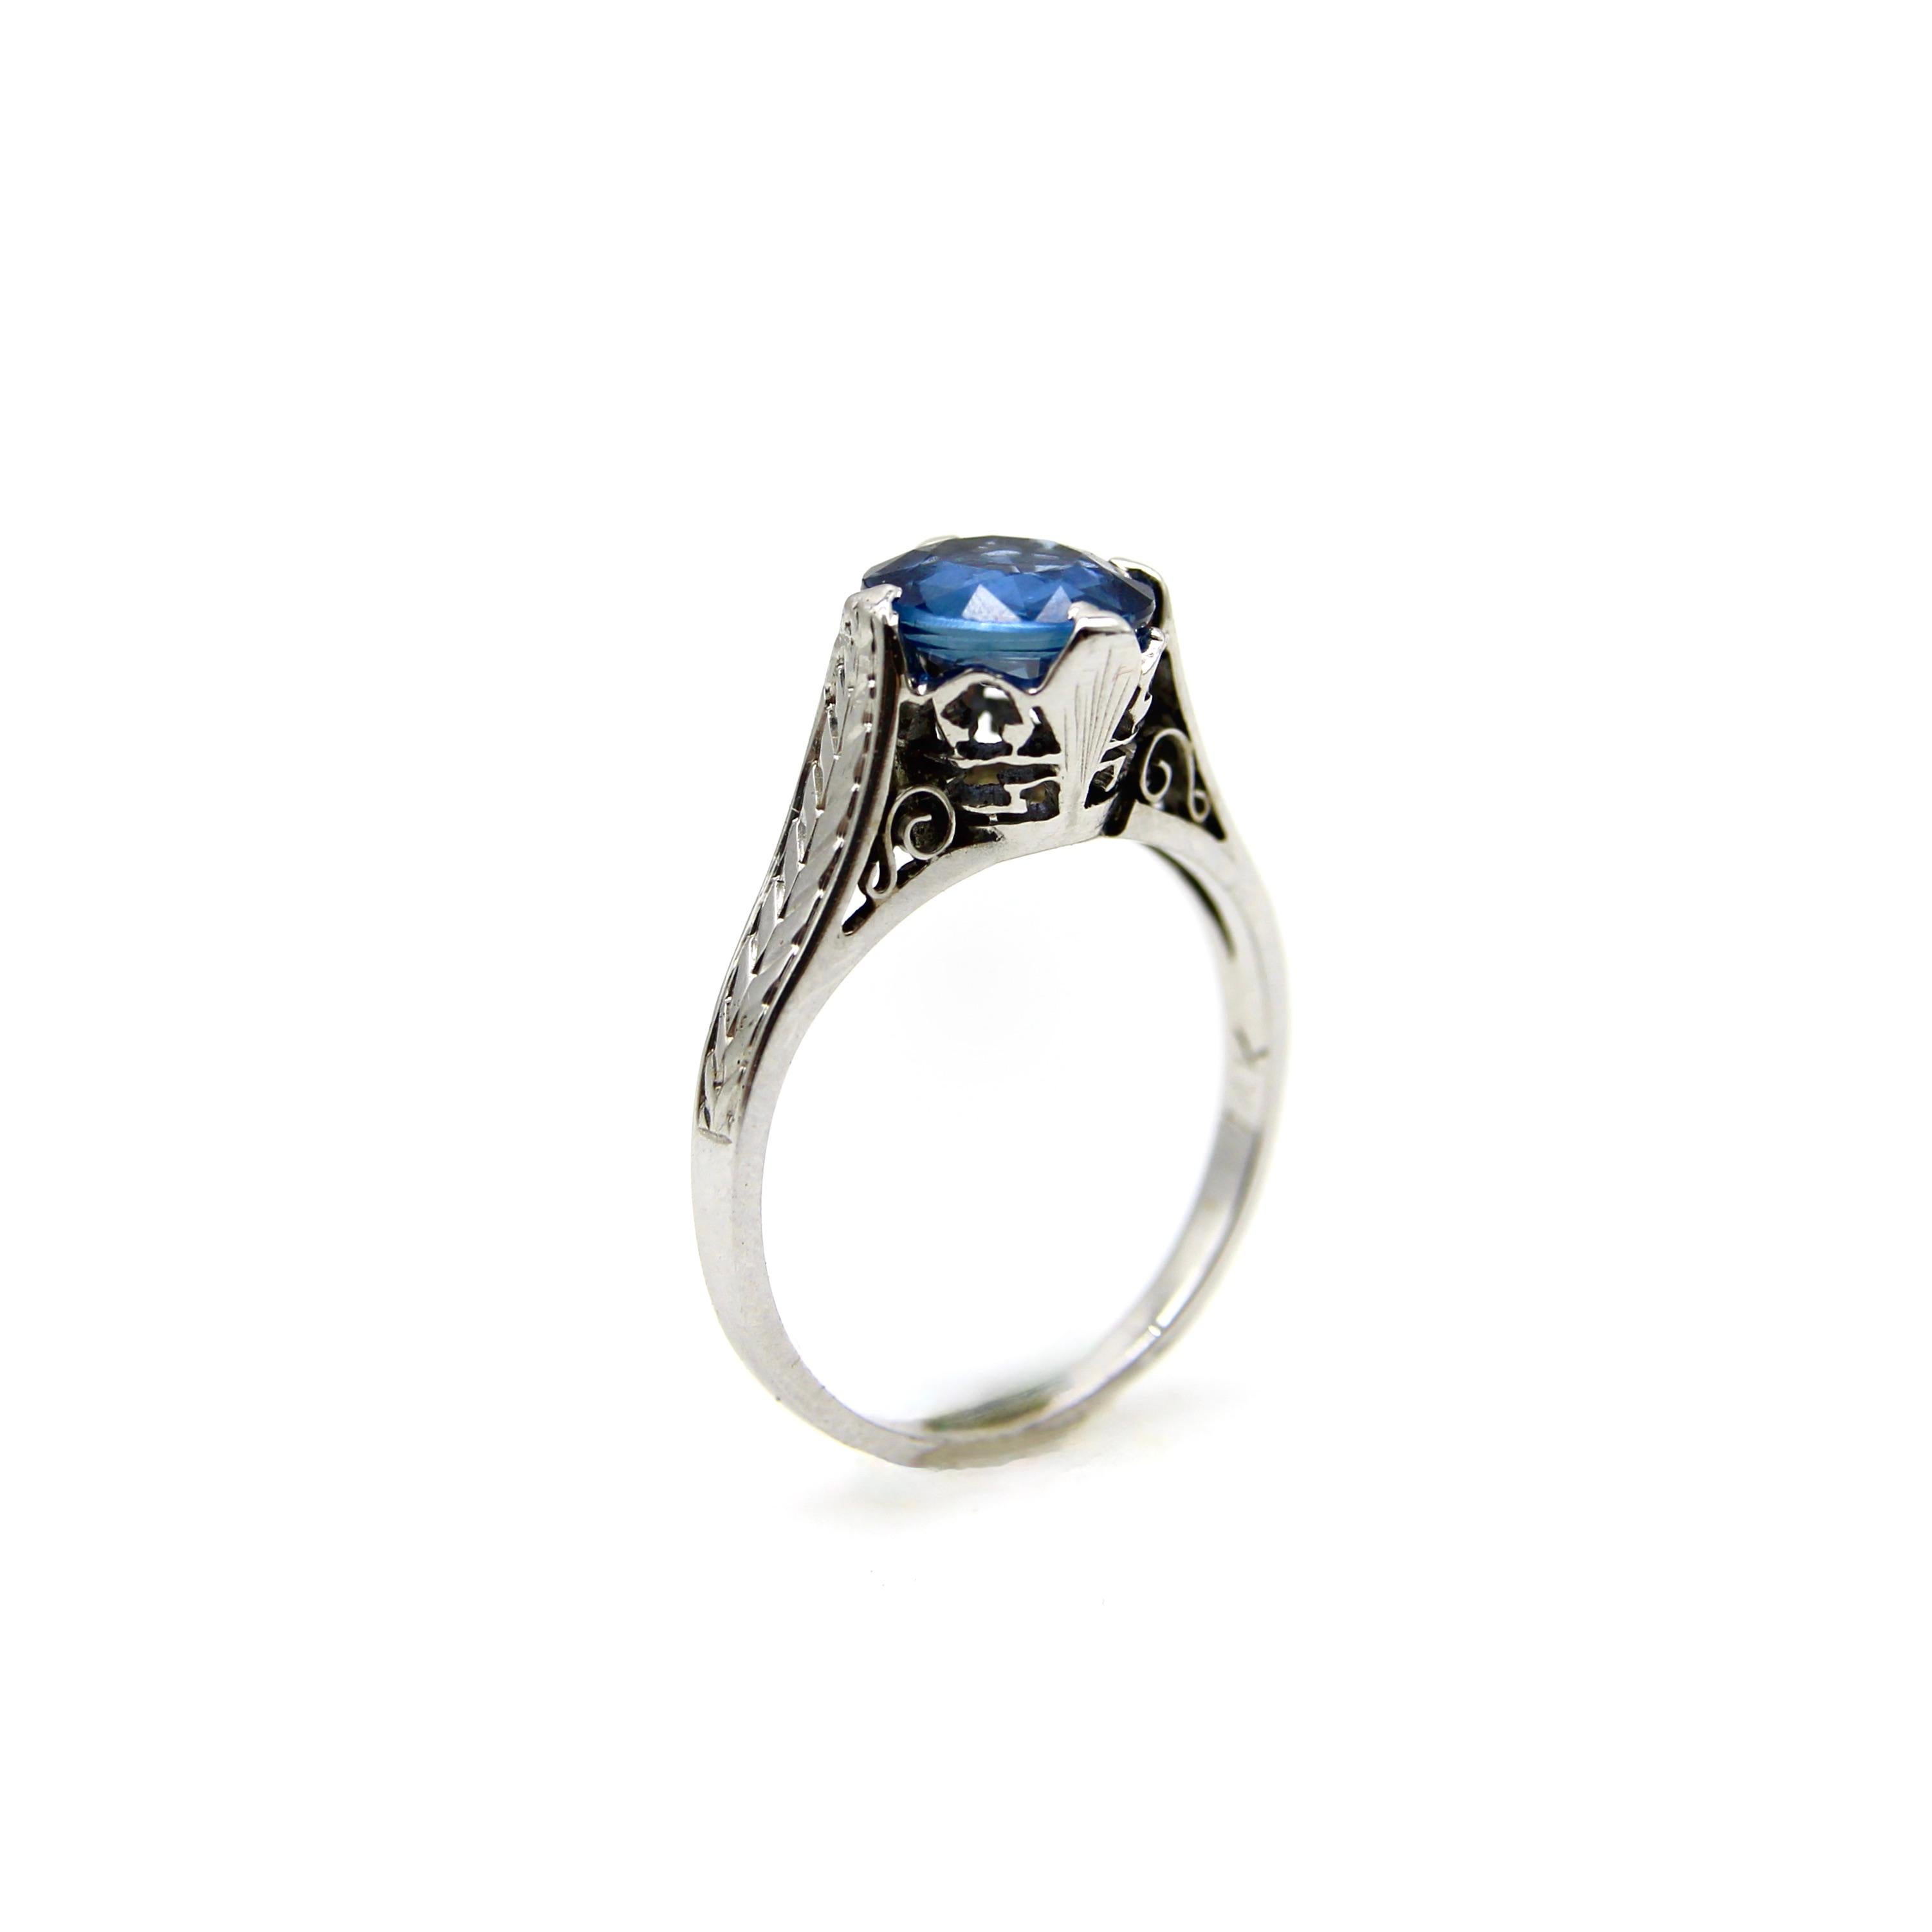 This 14k white gold ring features a natural blue sapphire in an Art Deco mount. The sapphire is a gorgeous shade of medium blue with grayish undertones. In the sunlight, the stone sparkles with an even more vibrant shade of blue, and the stone’s cut